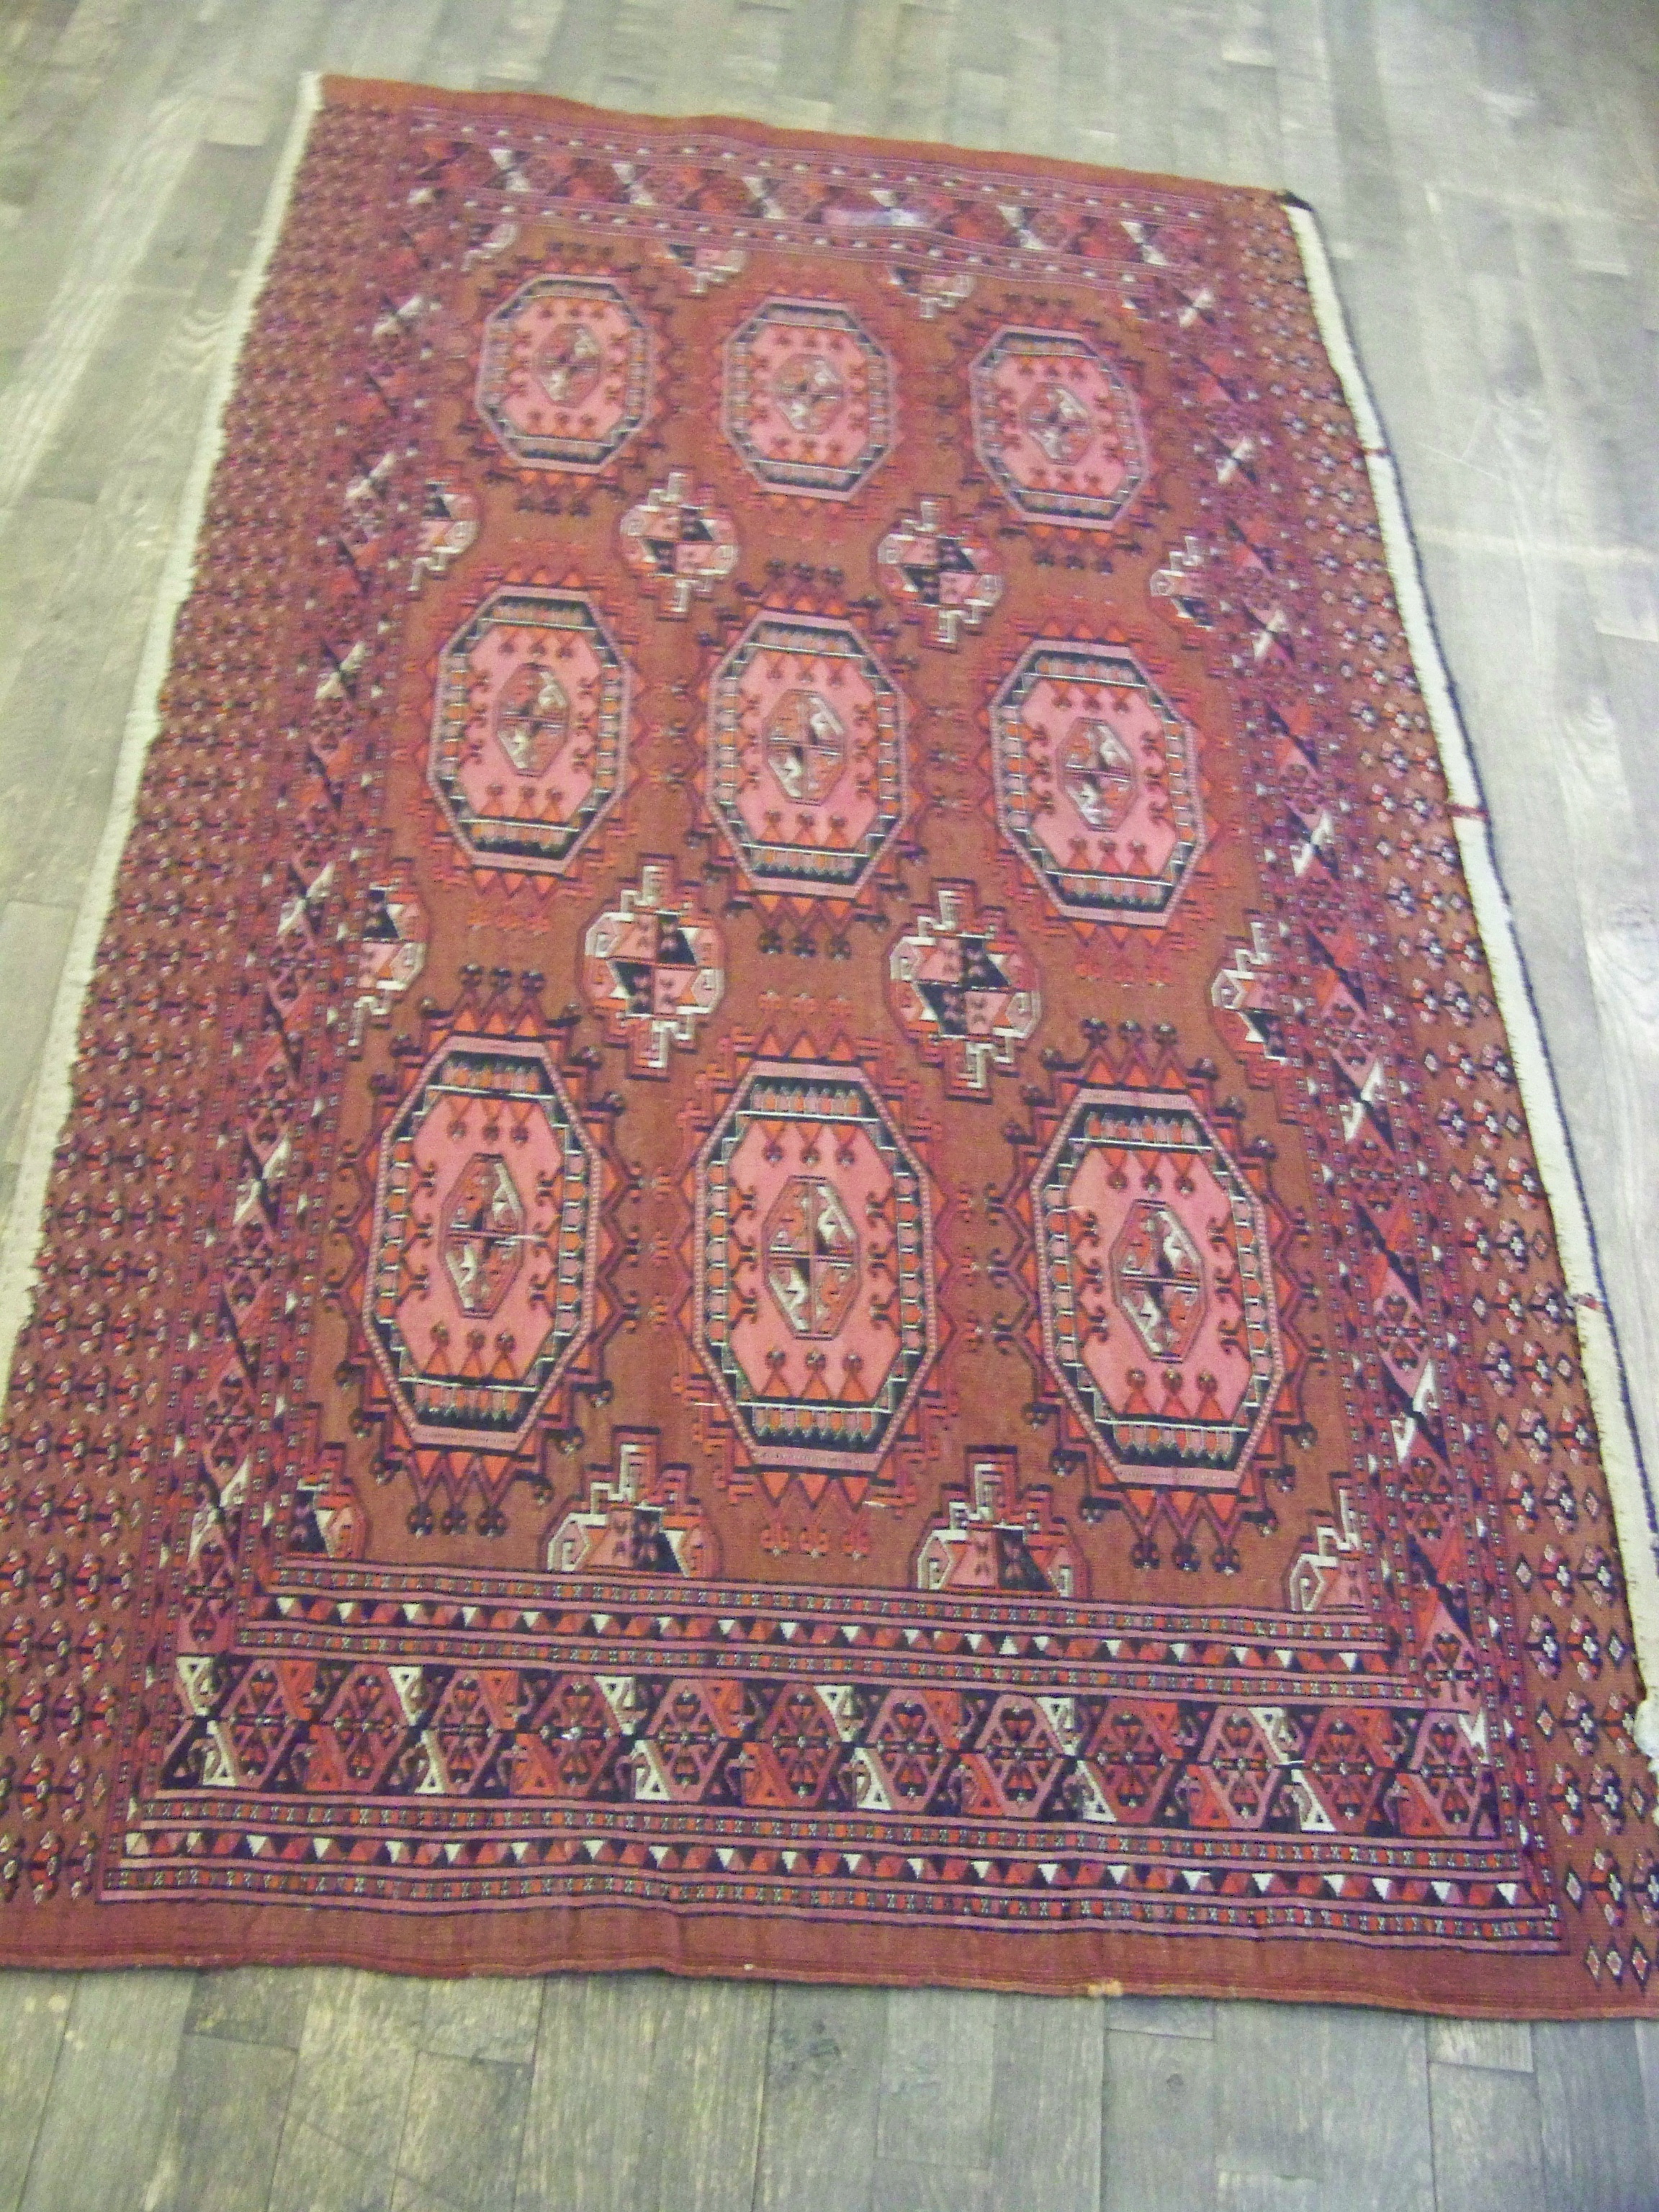 Item Number: 21808
Size: 3 ft 1 in  x 5 ft 4 in